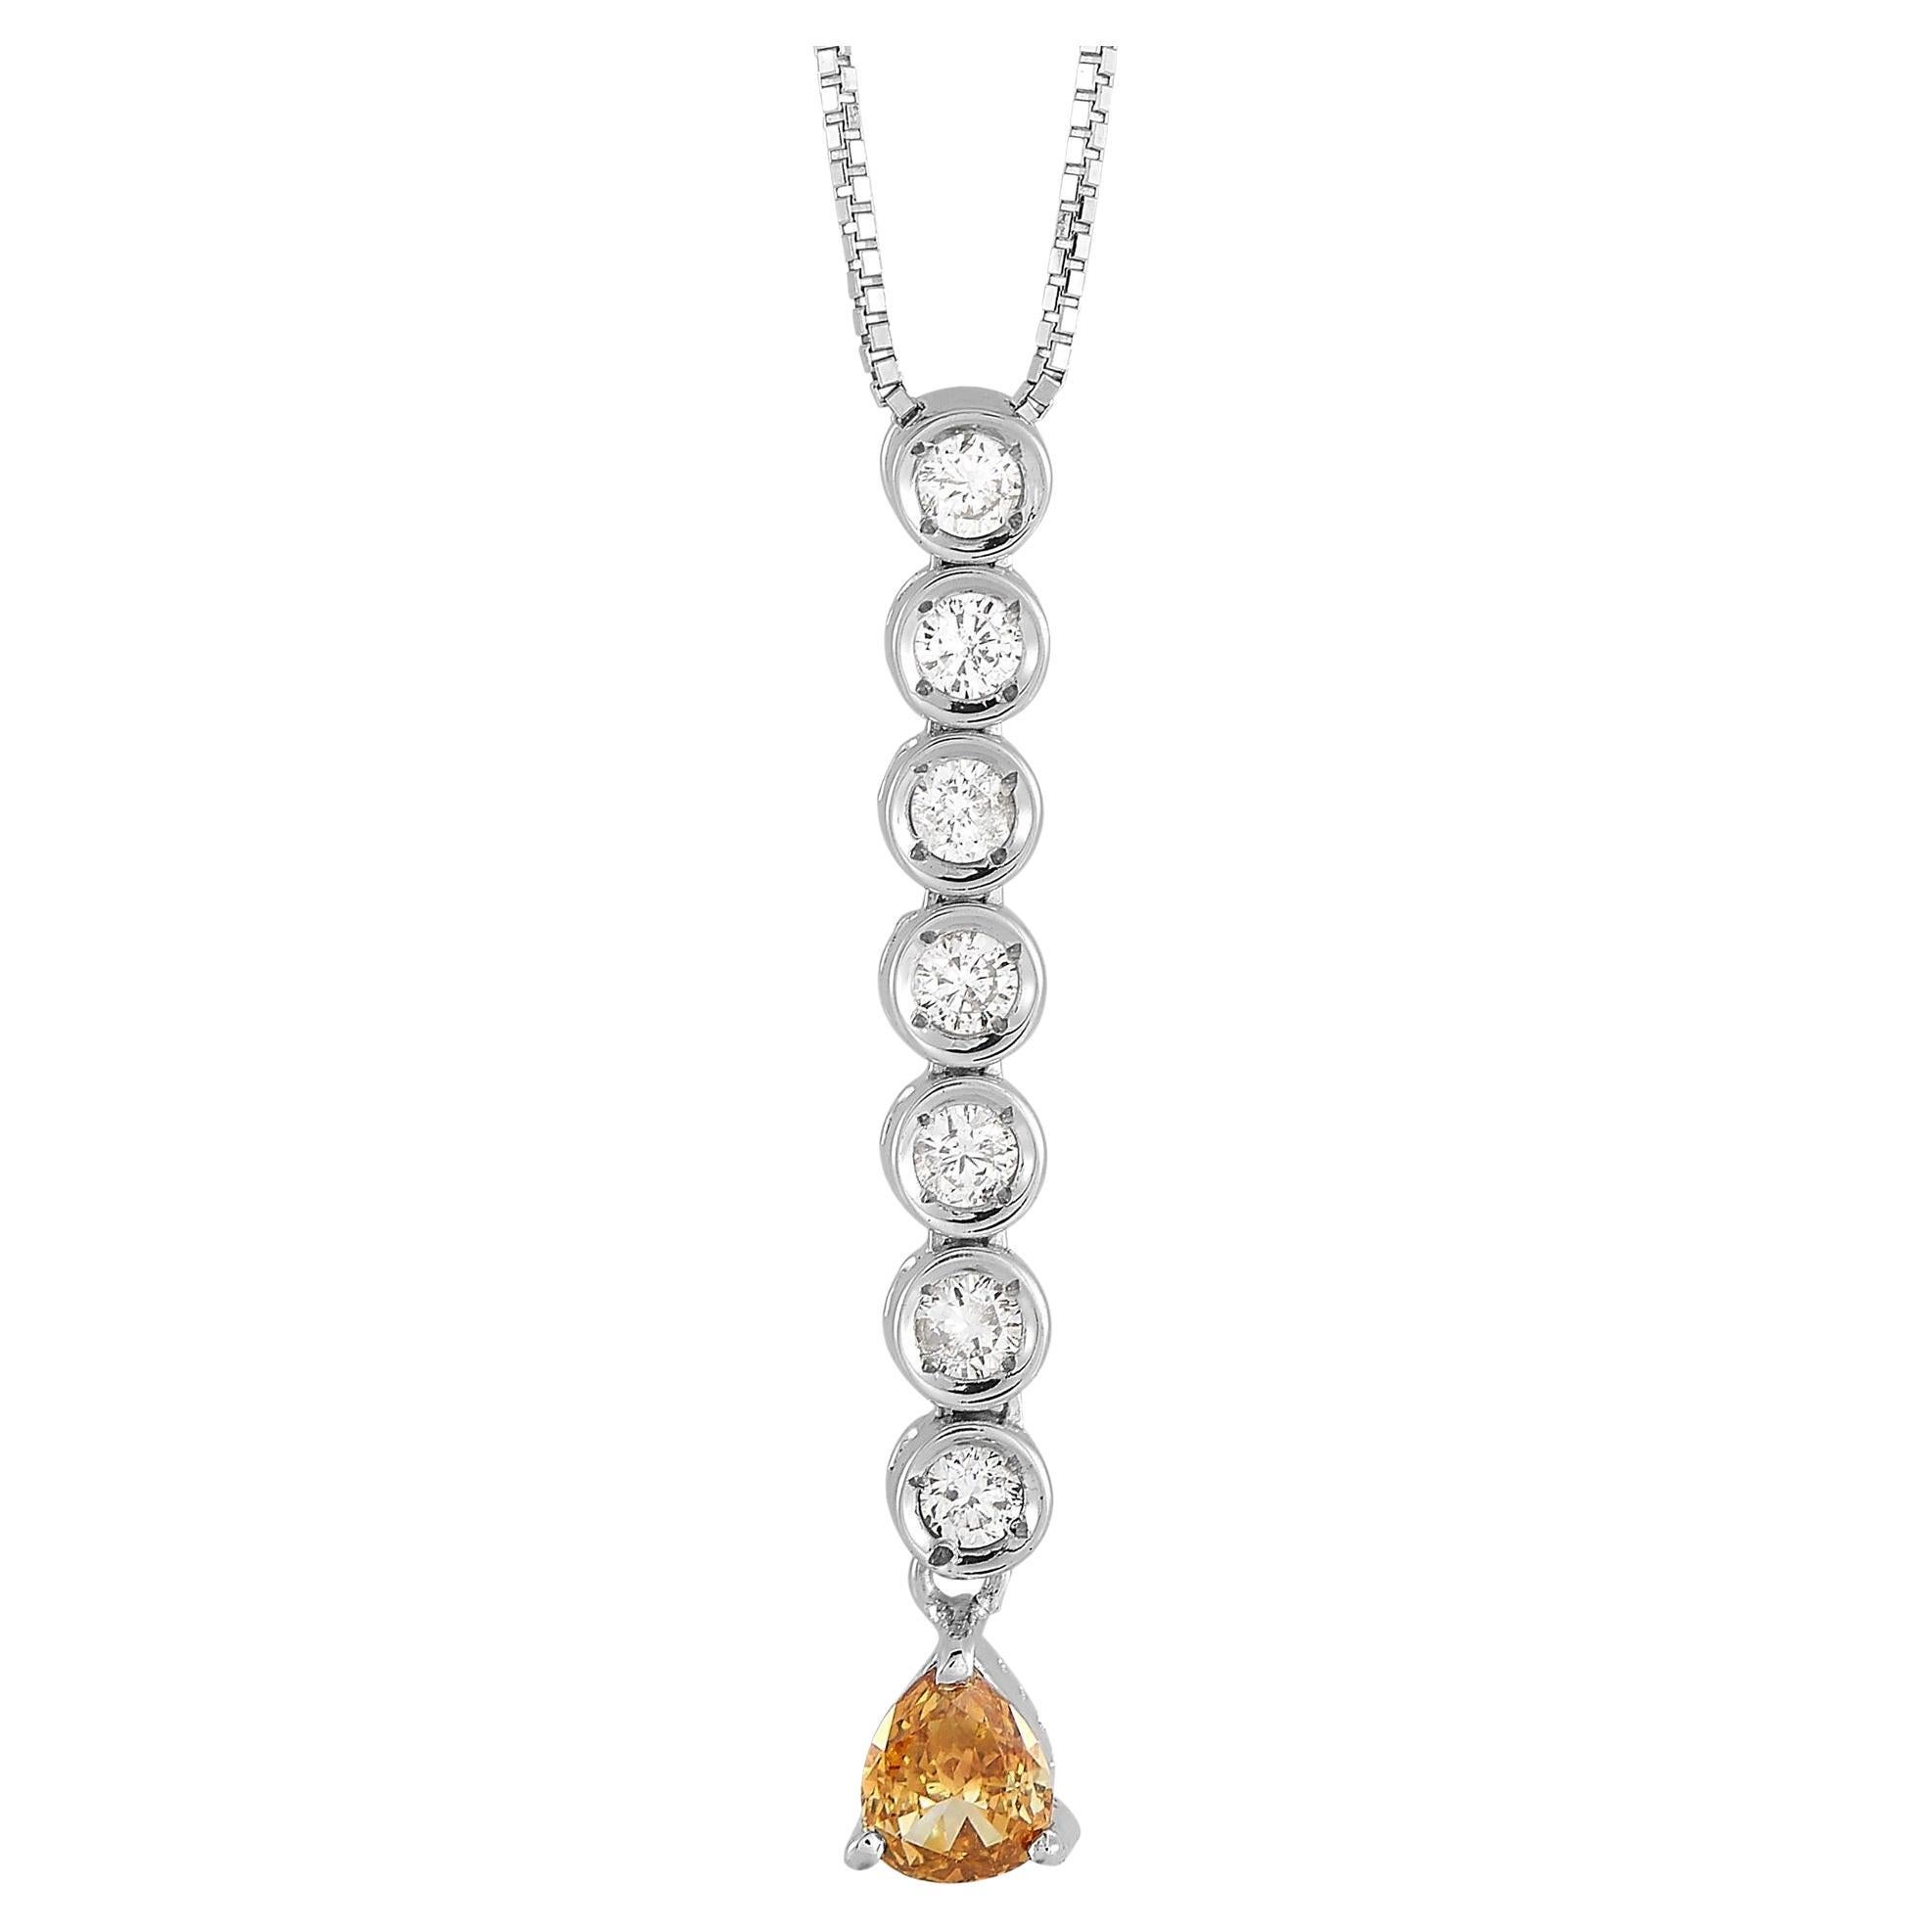 LB Exclusive 18K White Gold 0.55 Ct White and Brown Diamond Pendant Necklace